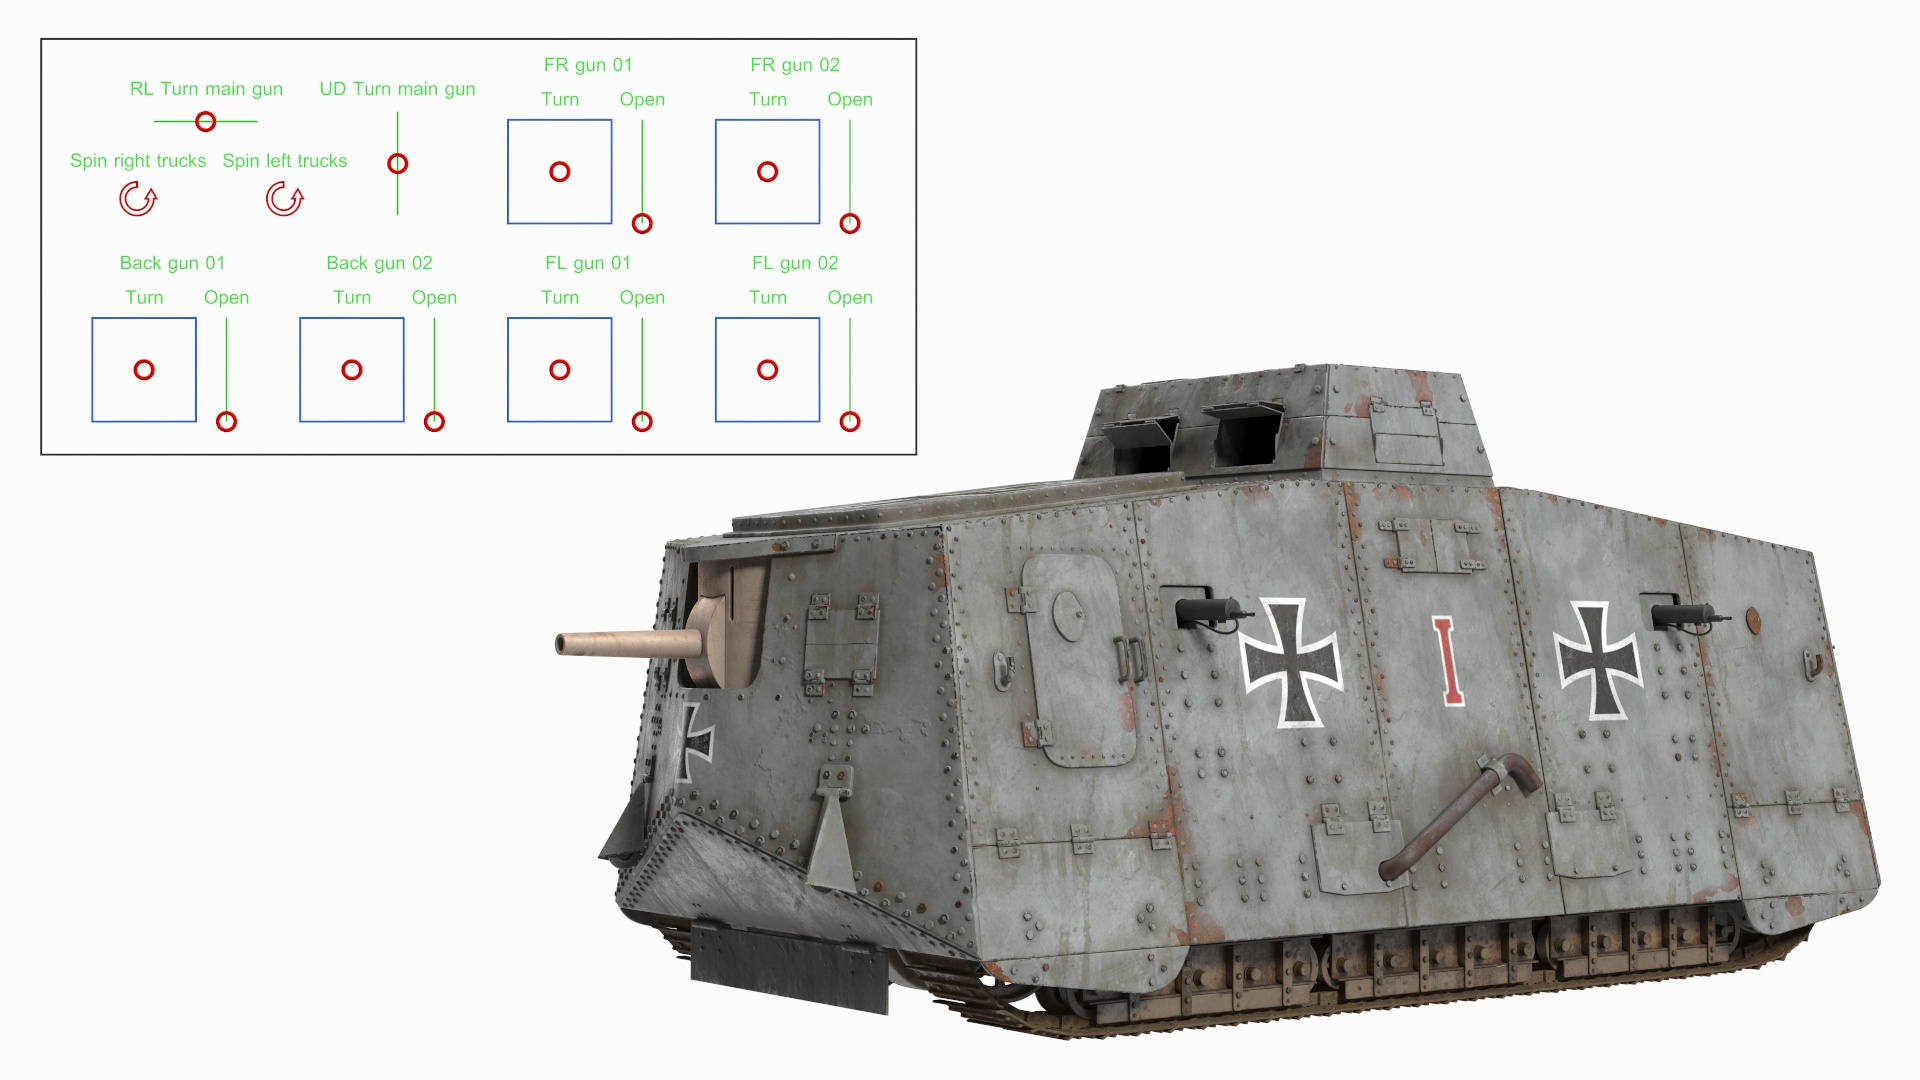 Share Project World of Tanks Blitz Micro scale: WWII German Heavy